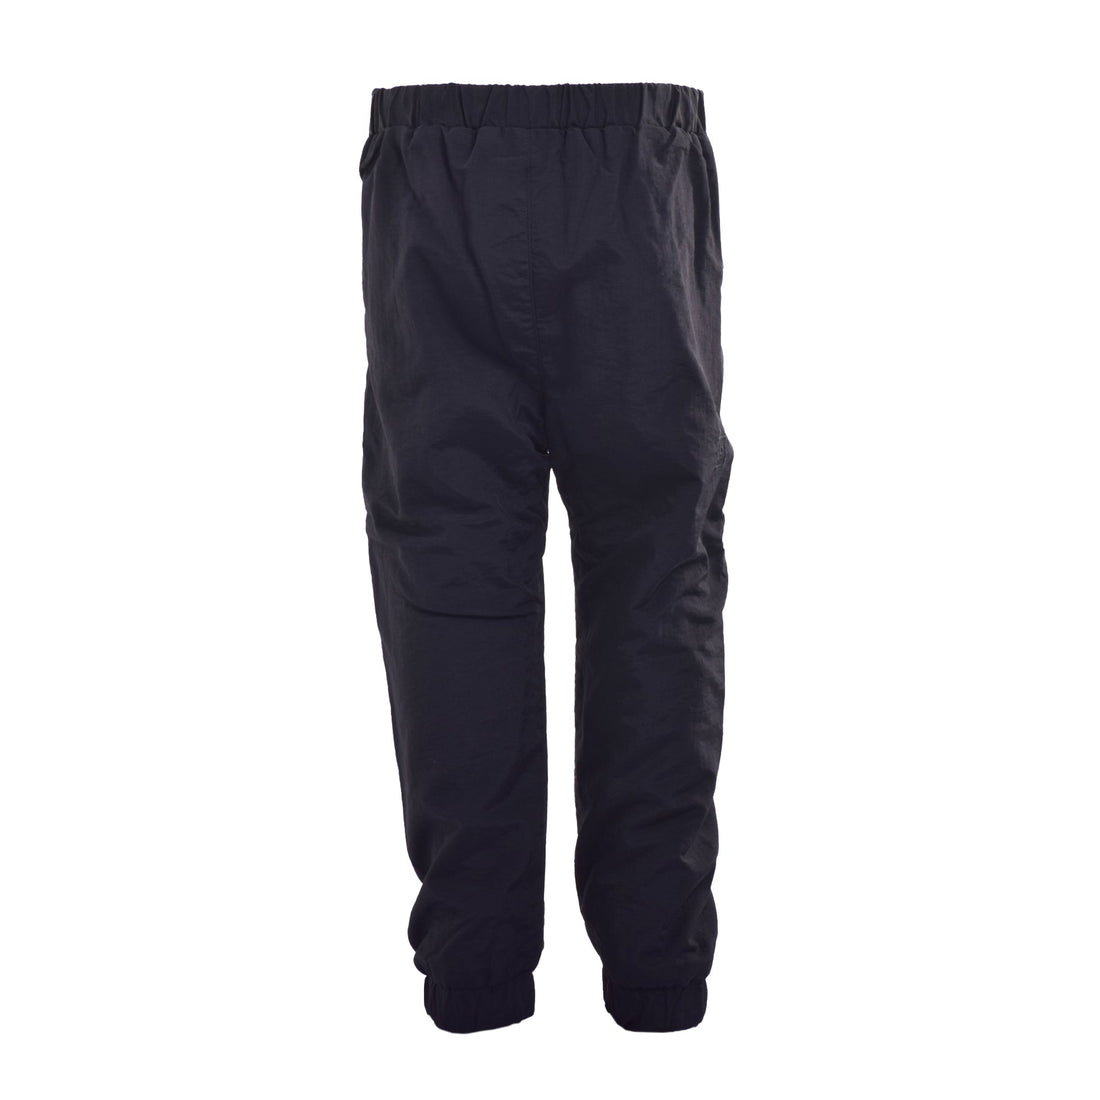 Outerwear pants, lined in polar (Langley)